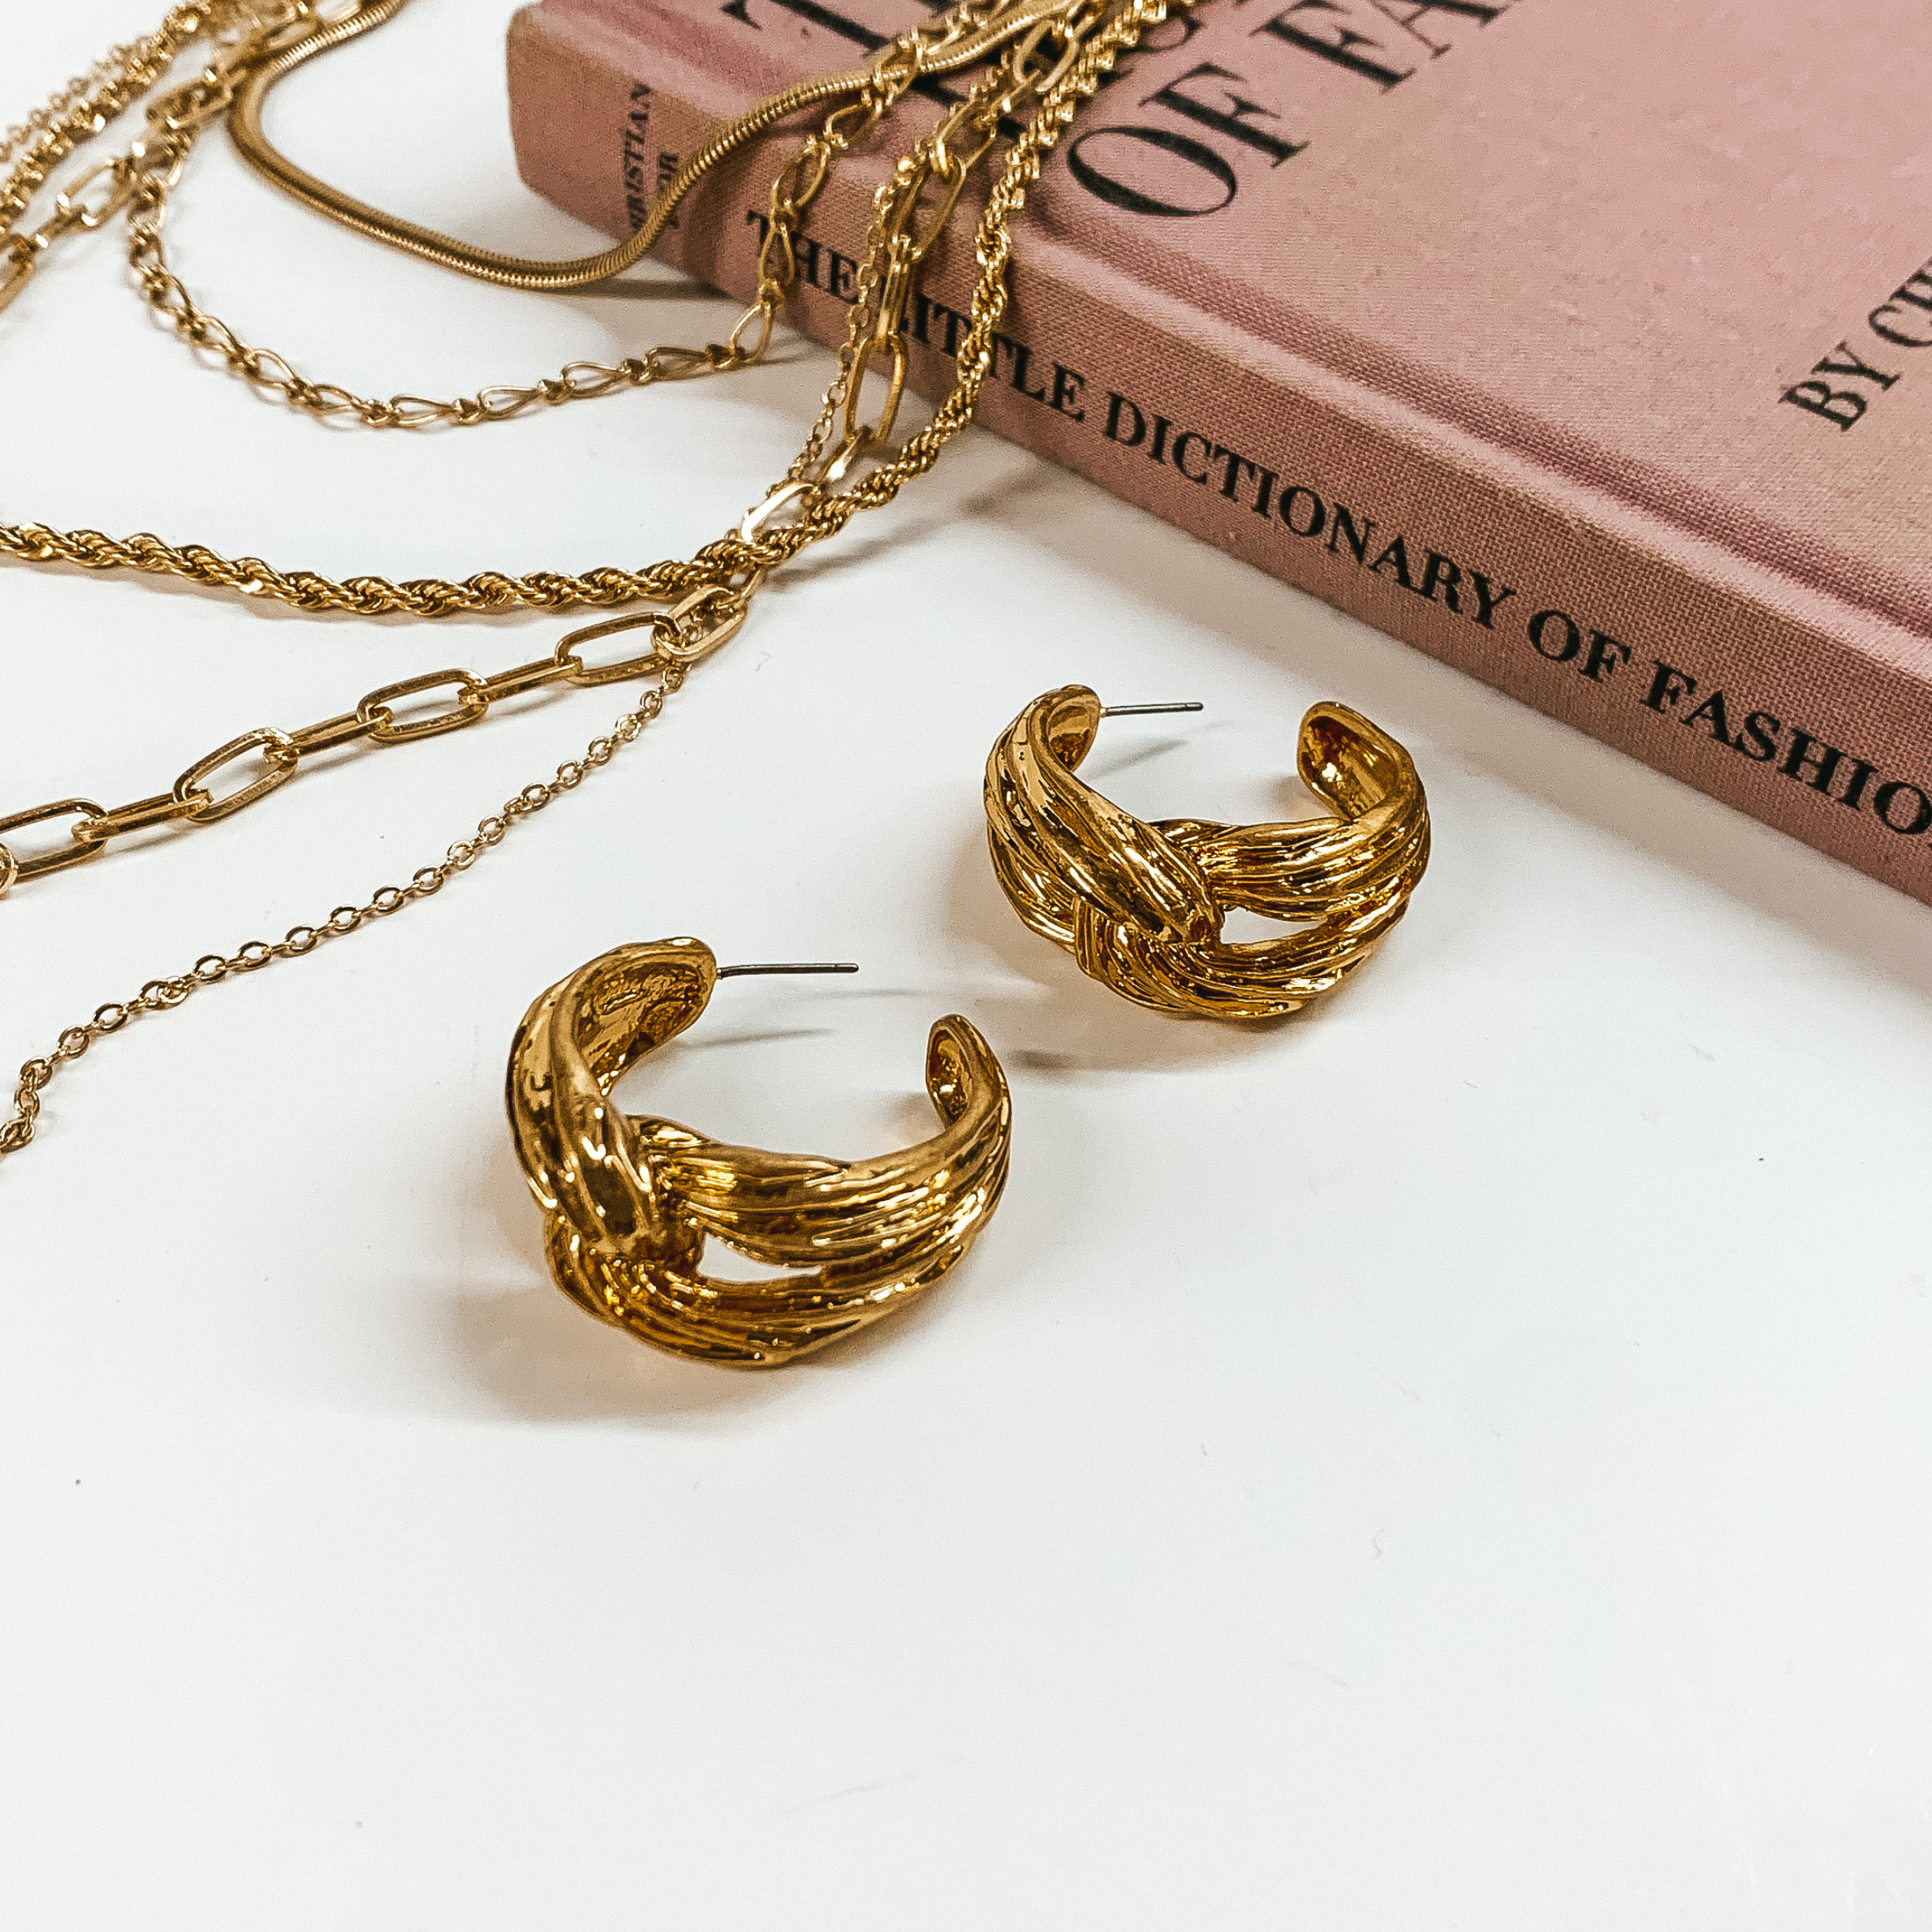 Tying the Knot Hoop Earrings in Gold Tone - Giddy Up Glamour Boutique